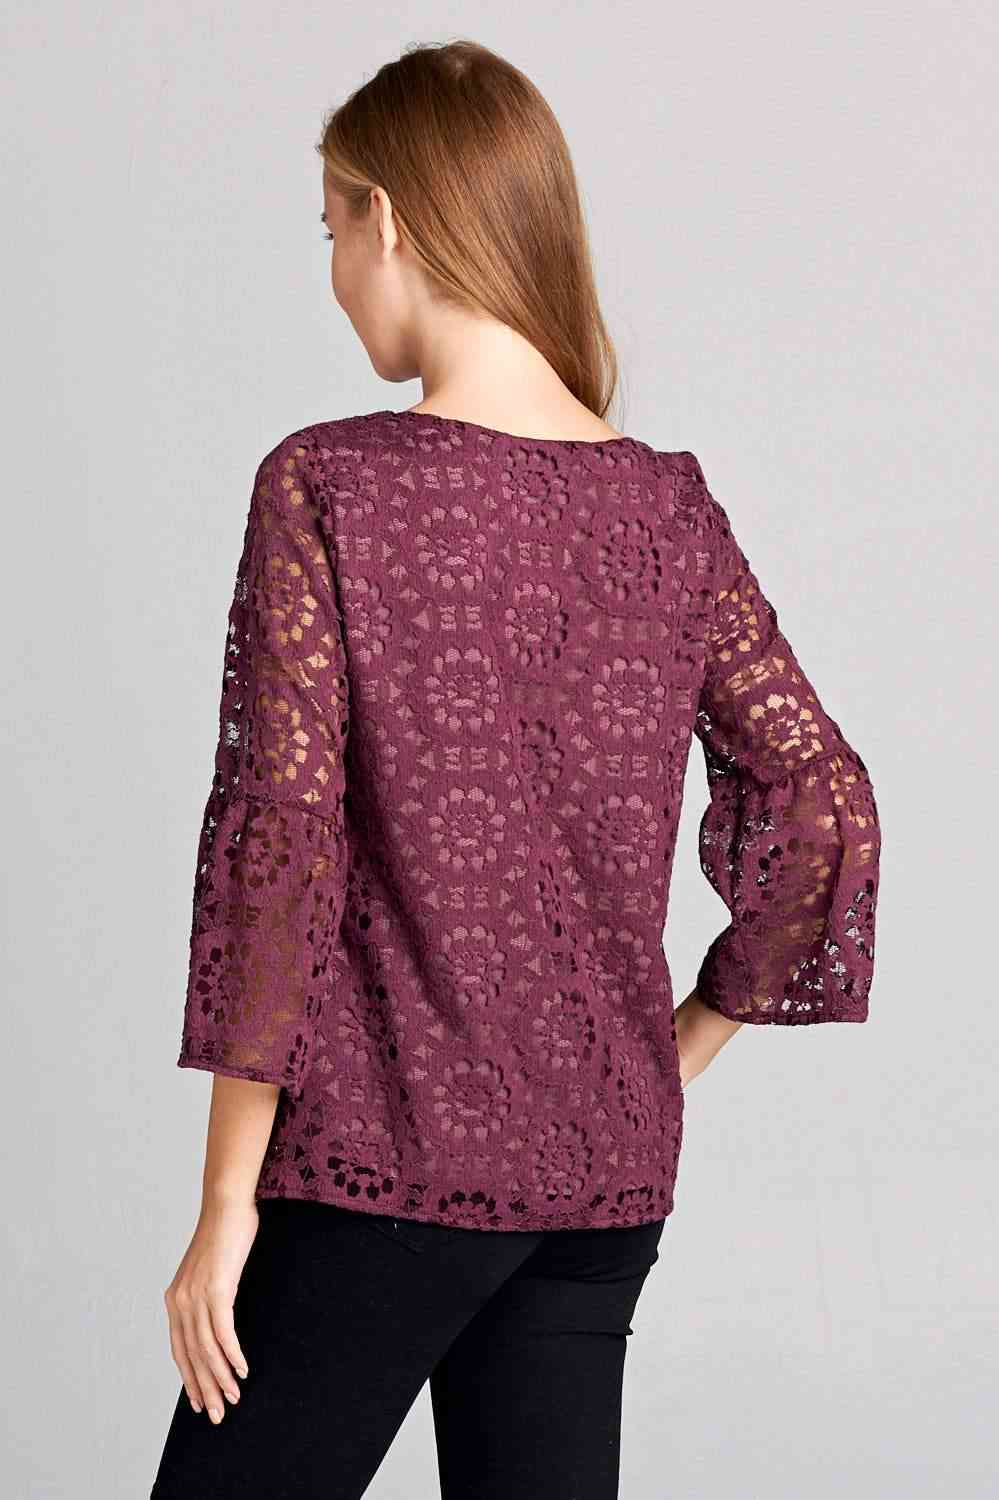 Patterned Knit Lace Top